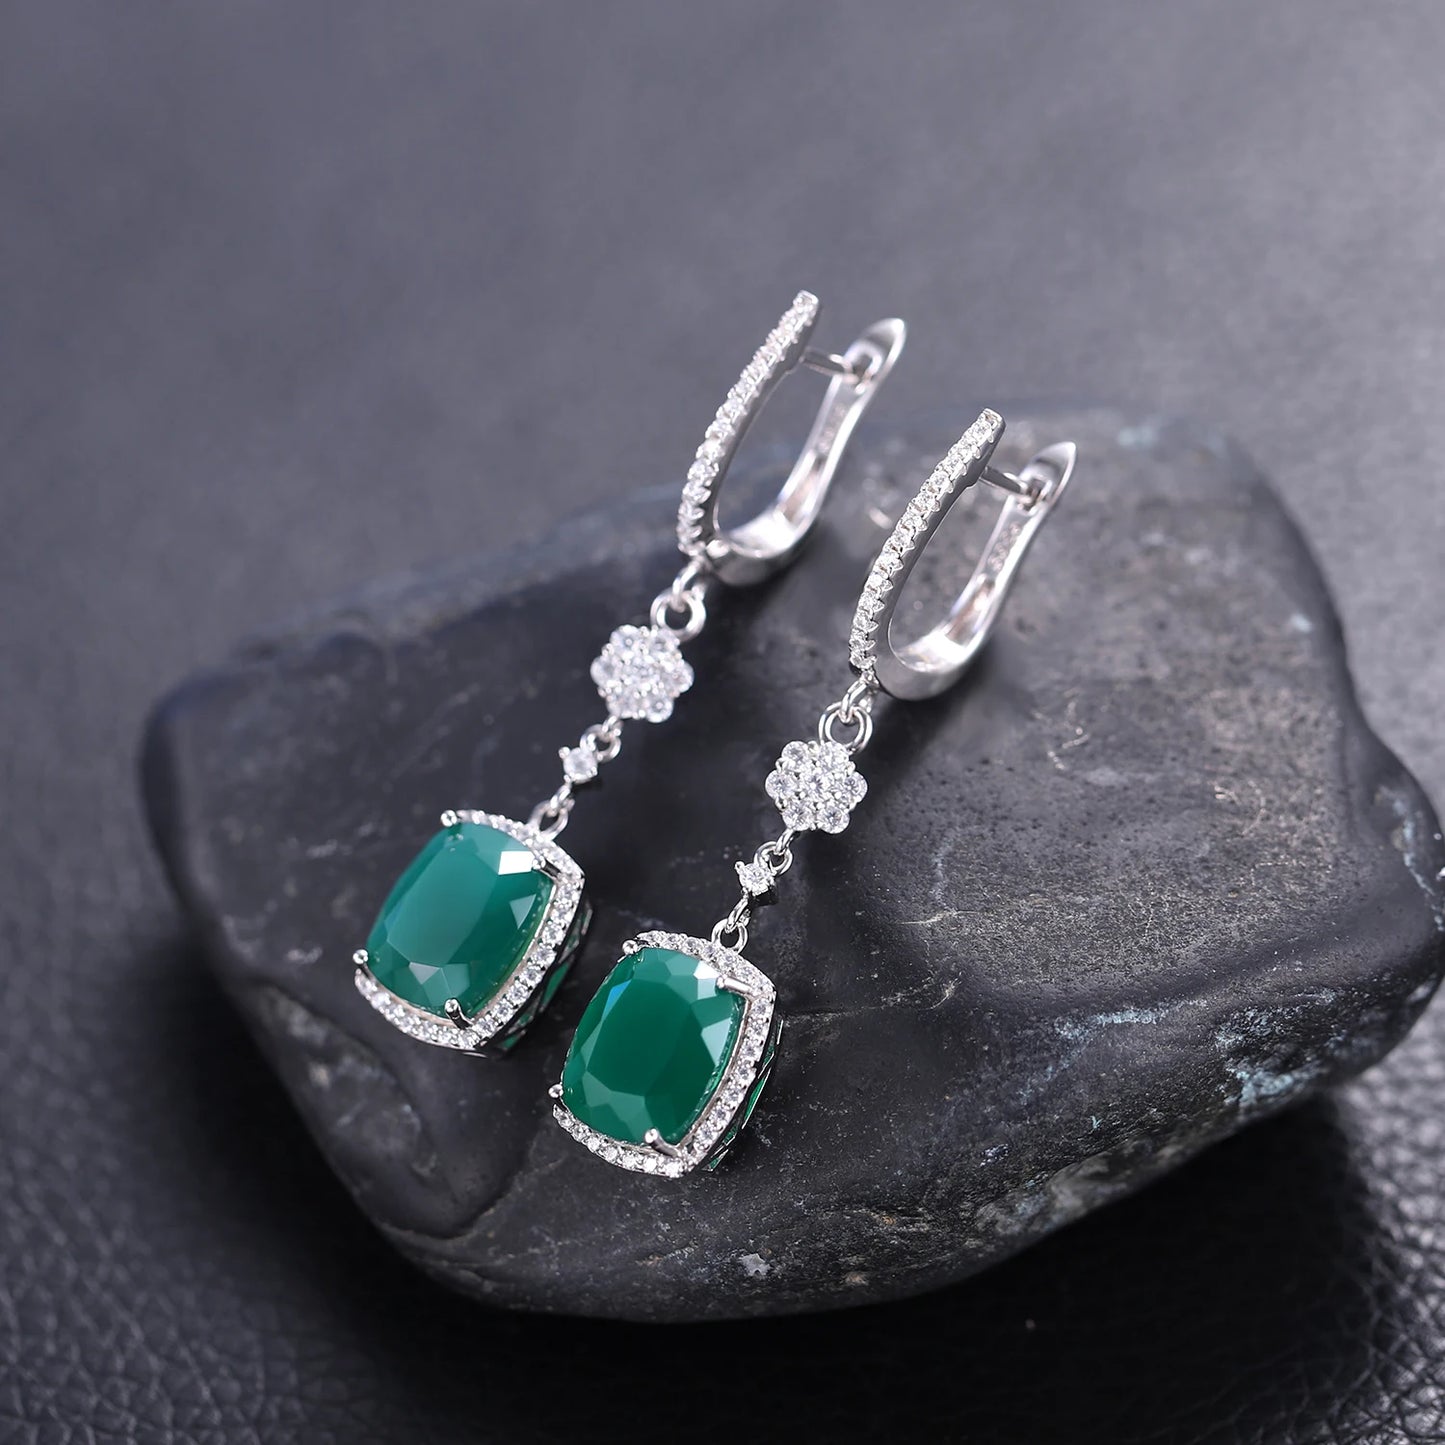 Gem's Ballet Natural Green Agate Earrings Solid 925 Sterling Silver 4.43ct Gorgeous Fine Jewelry Drop Earrings For Women